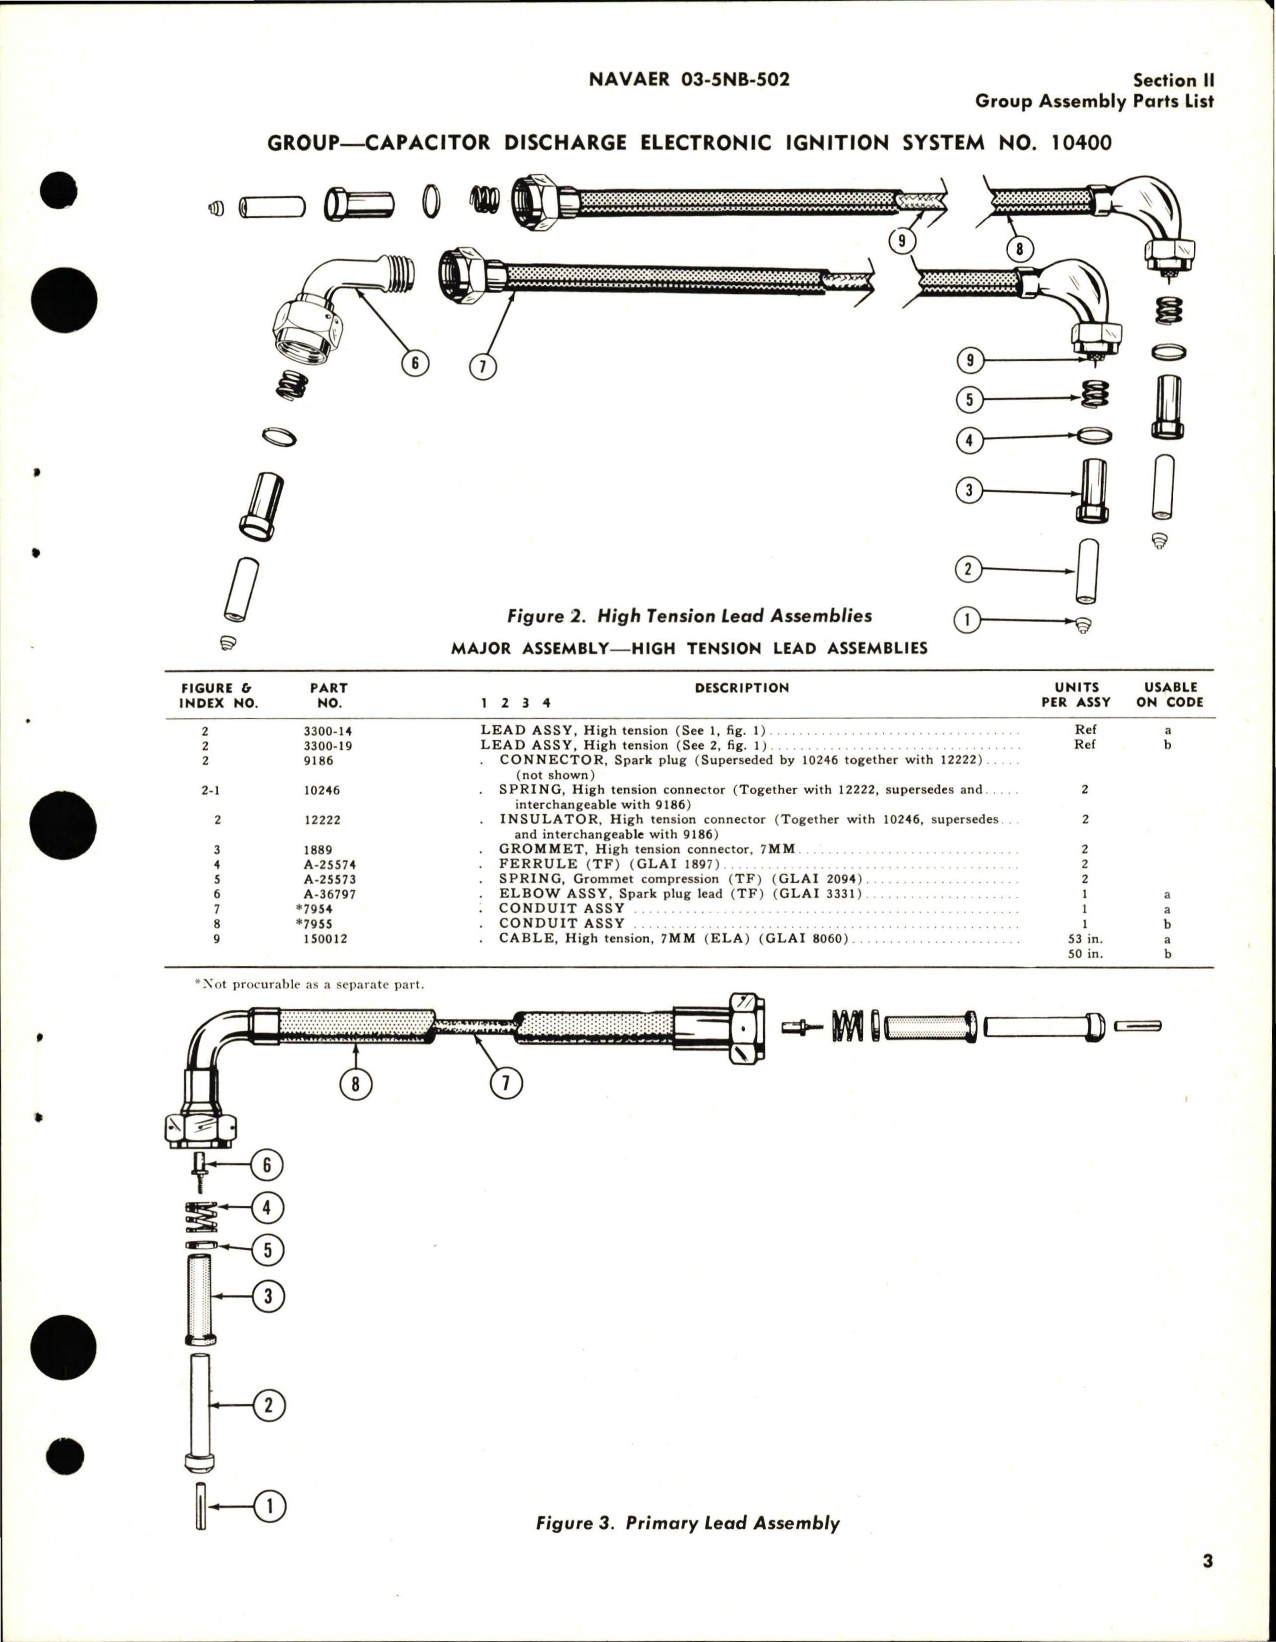 Sample page 5 from AirCorps Library document: Illustrated Parts Breakdown for Capacitor Discharge Electronic Ignition System - No 10400 